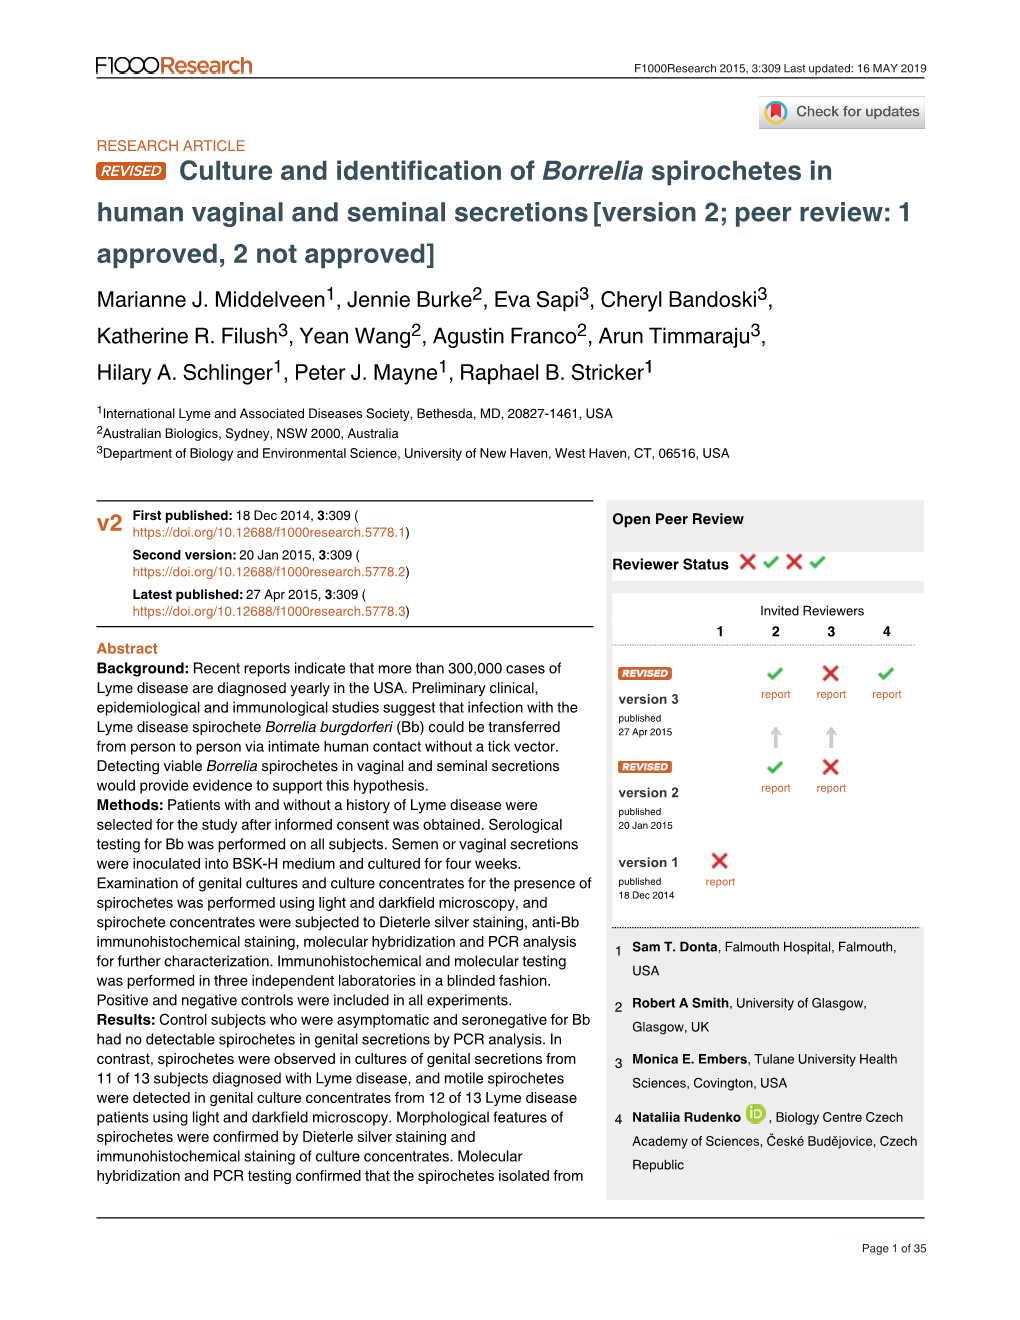 Culture and Identification of Spirochetes in Borrelia Human Vaginal and Seminal Secretions[Version 2; Peer Review: 1 Approved, 2